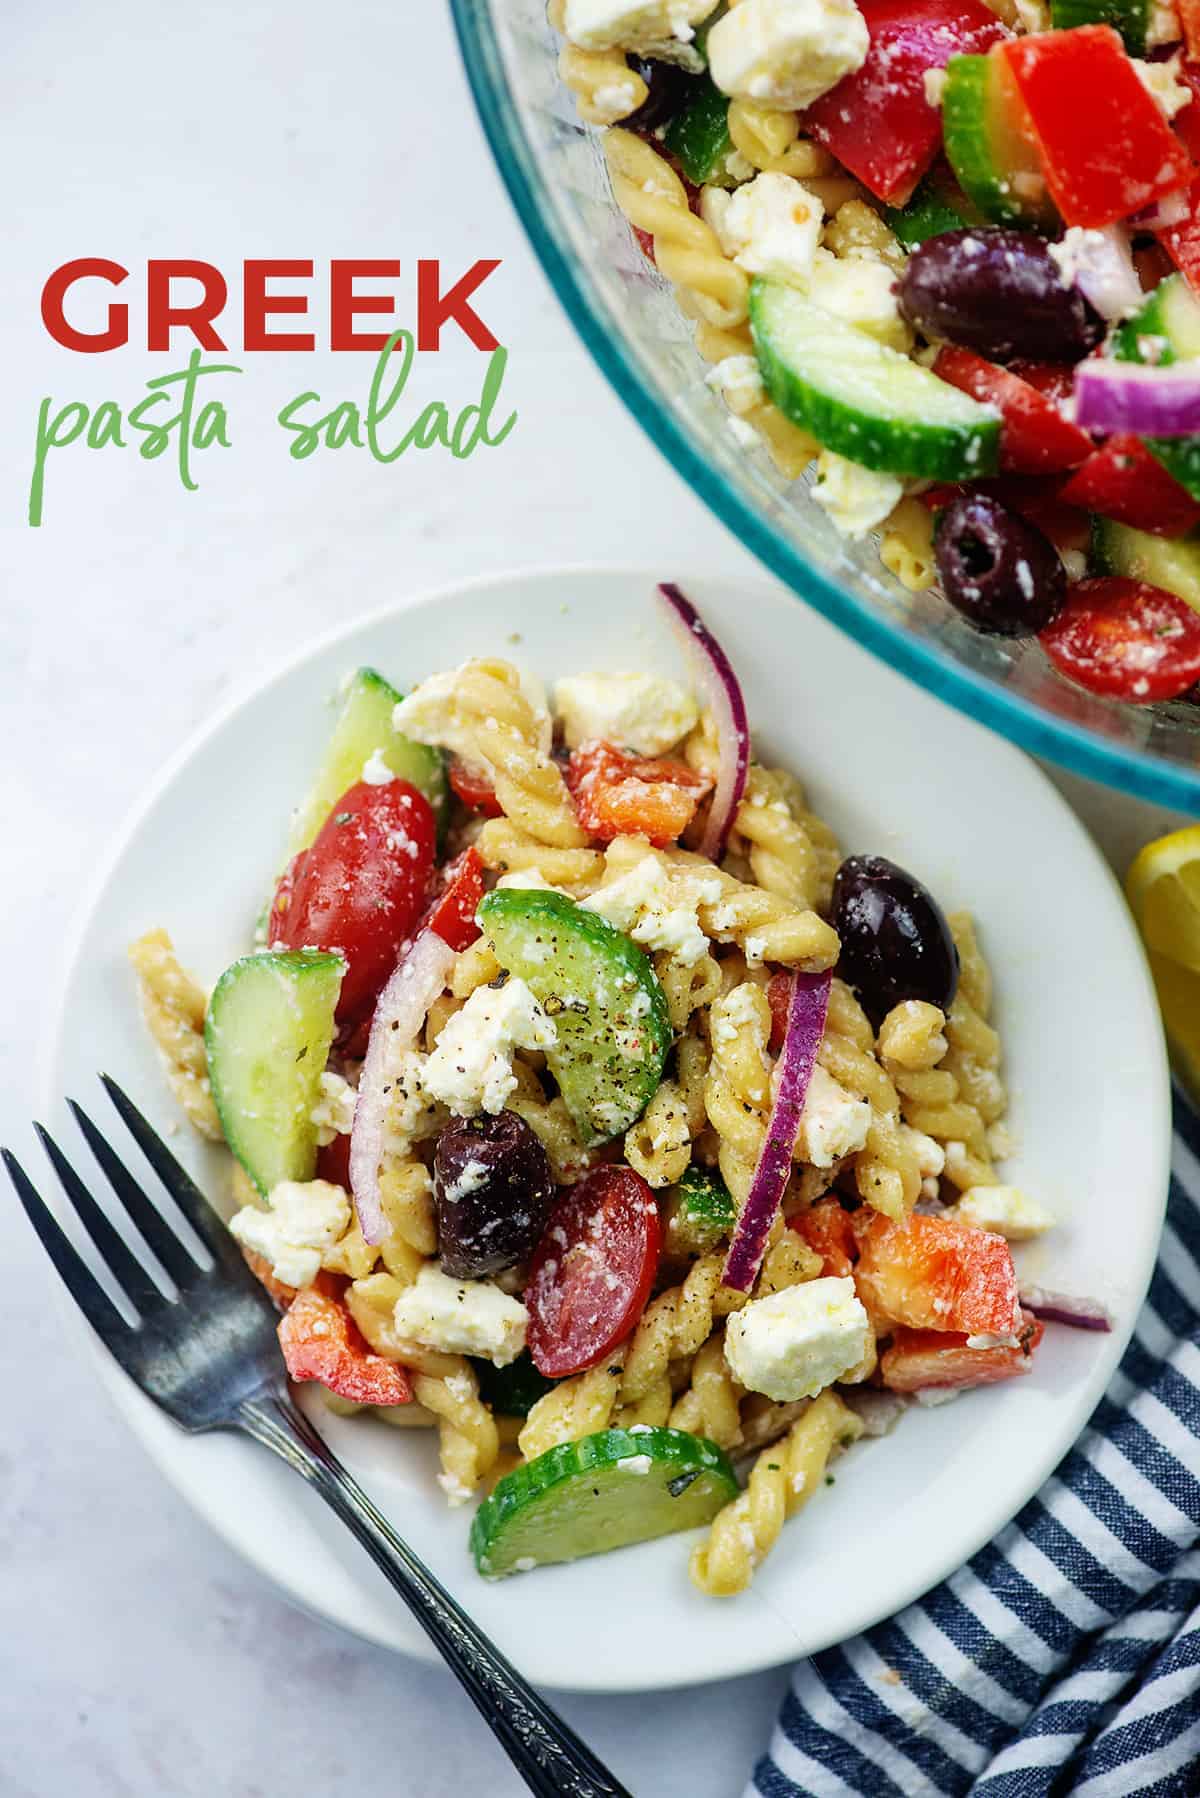 Greek pasta salad on white plate with blue striped napkin